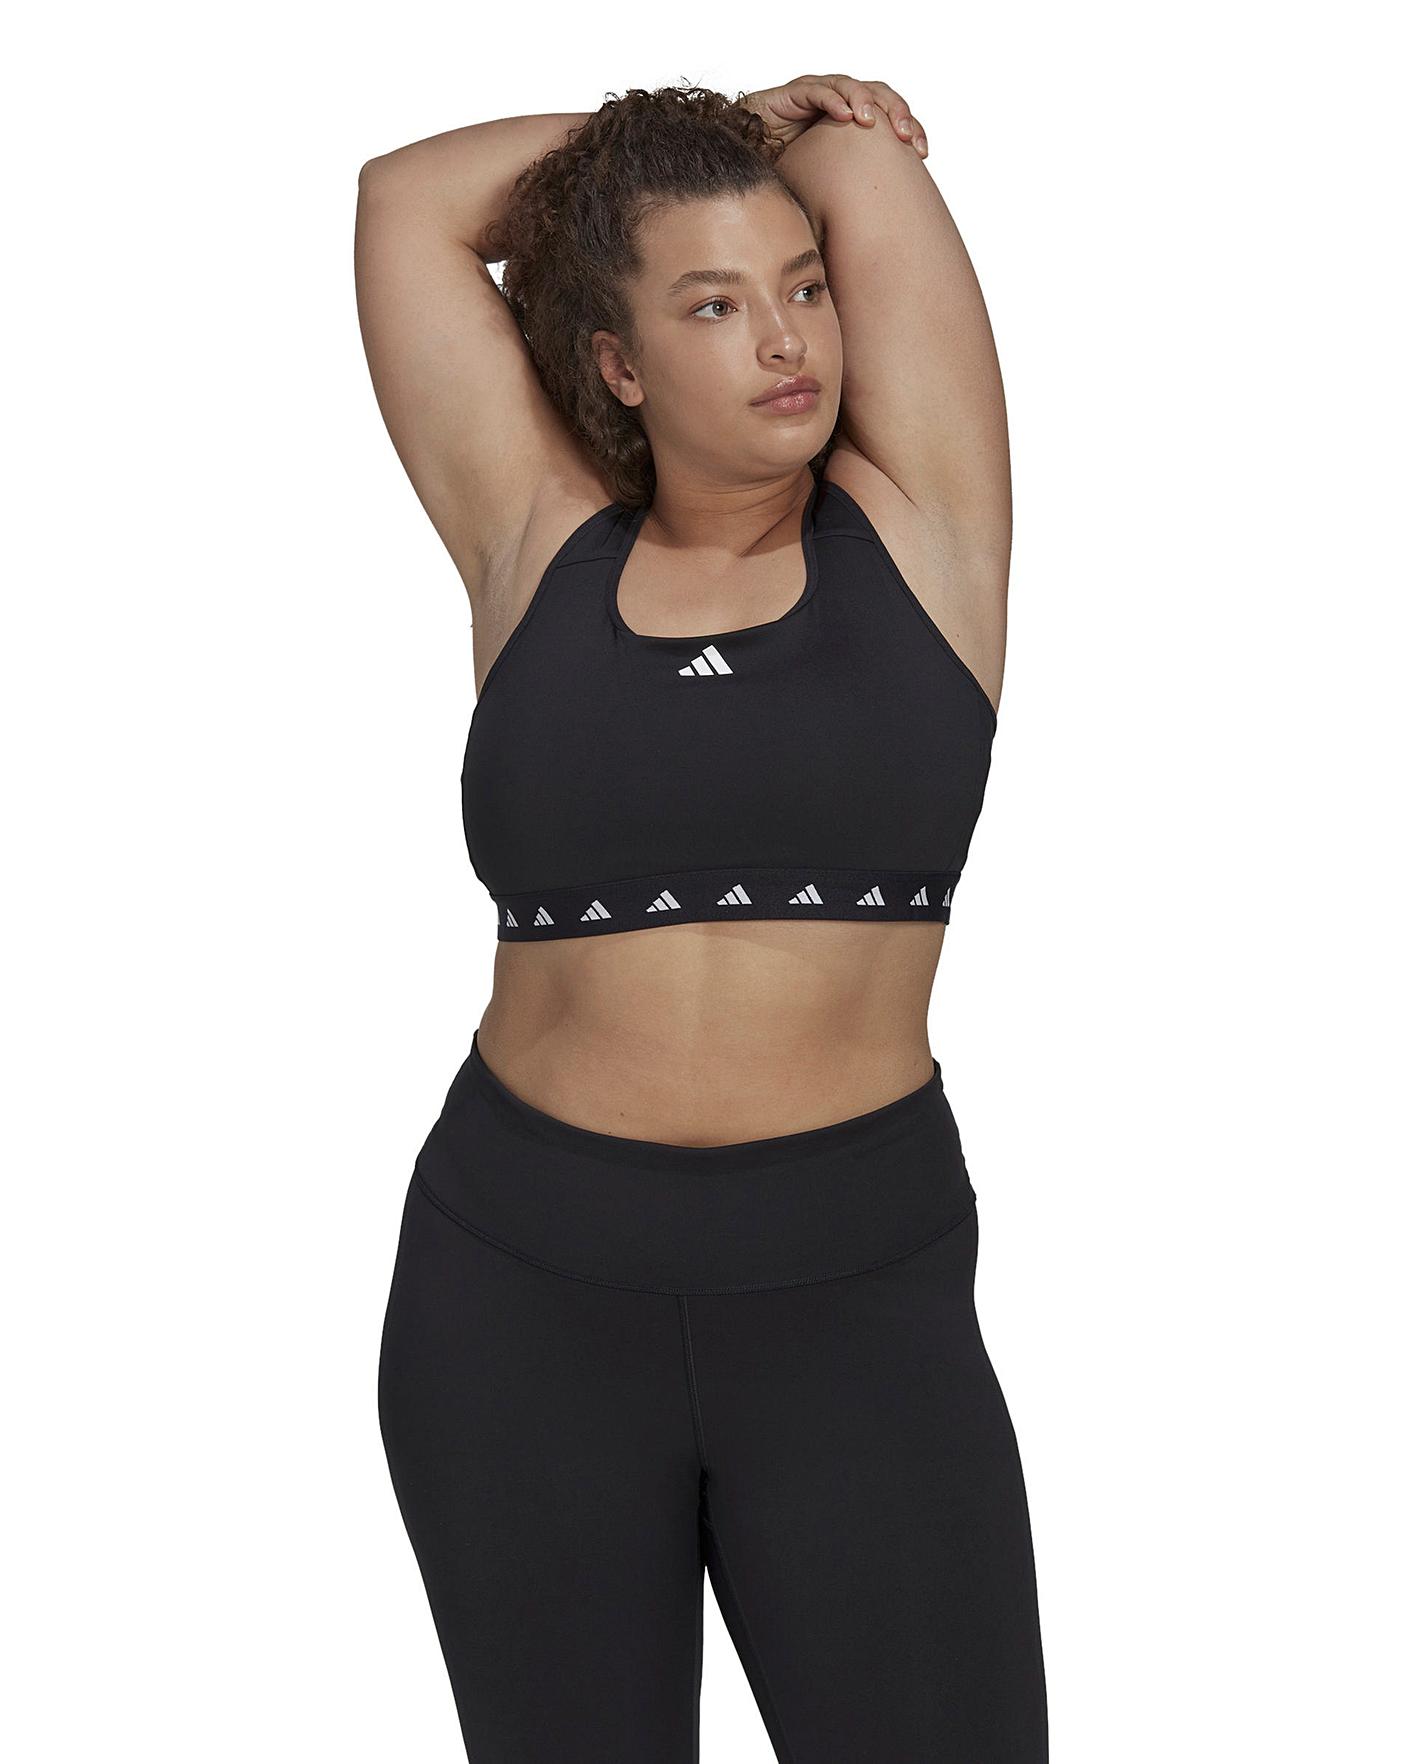 adidas: How to find your correct sports bra size